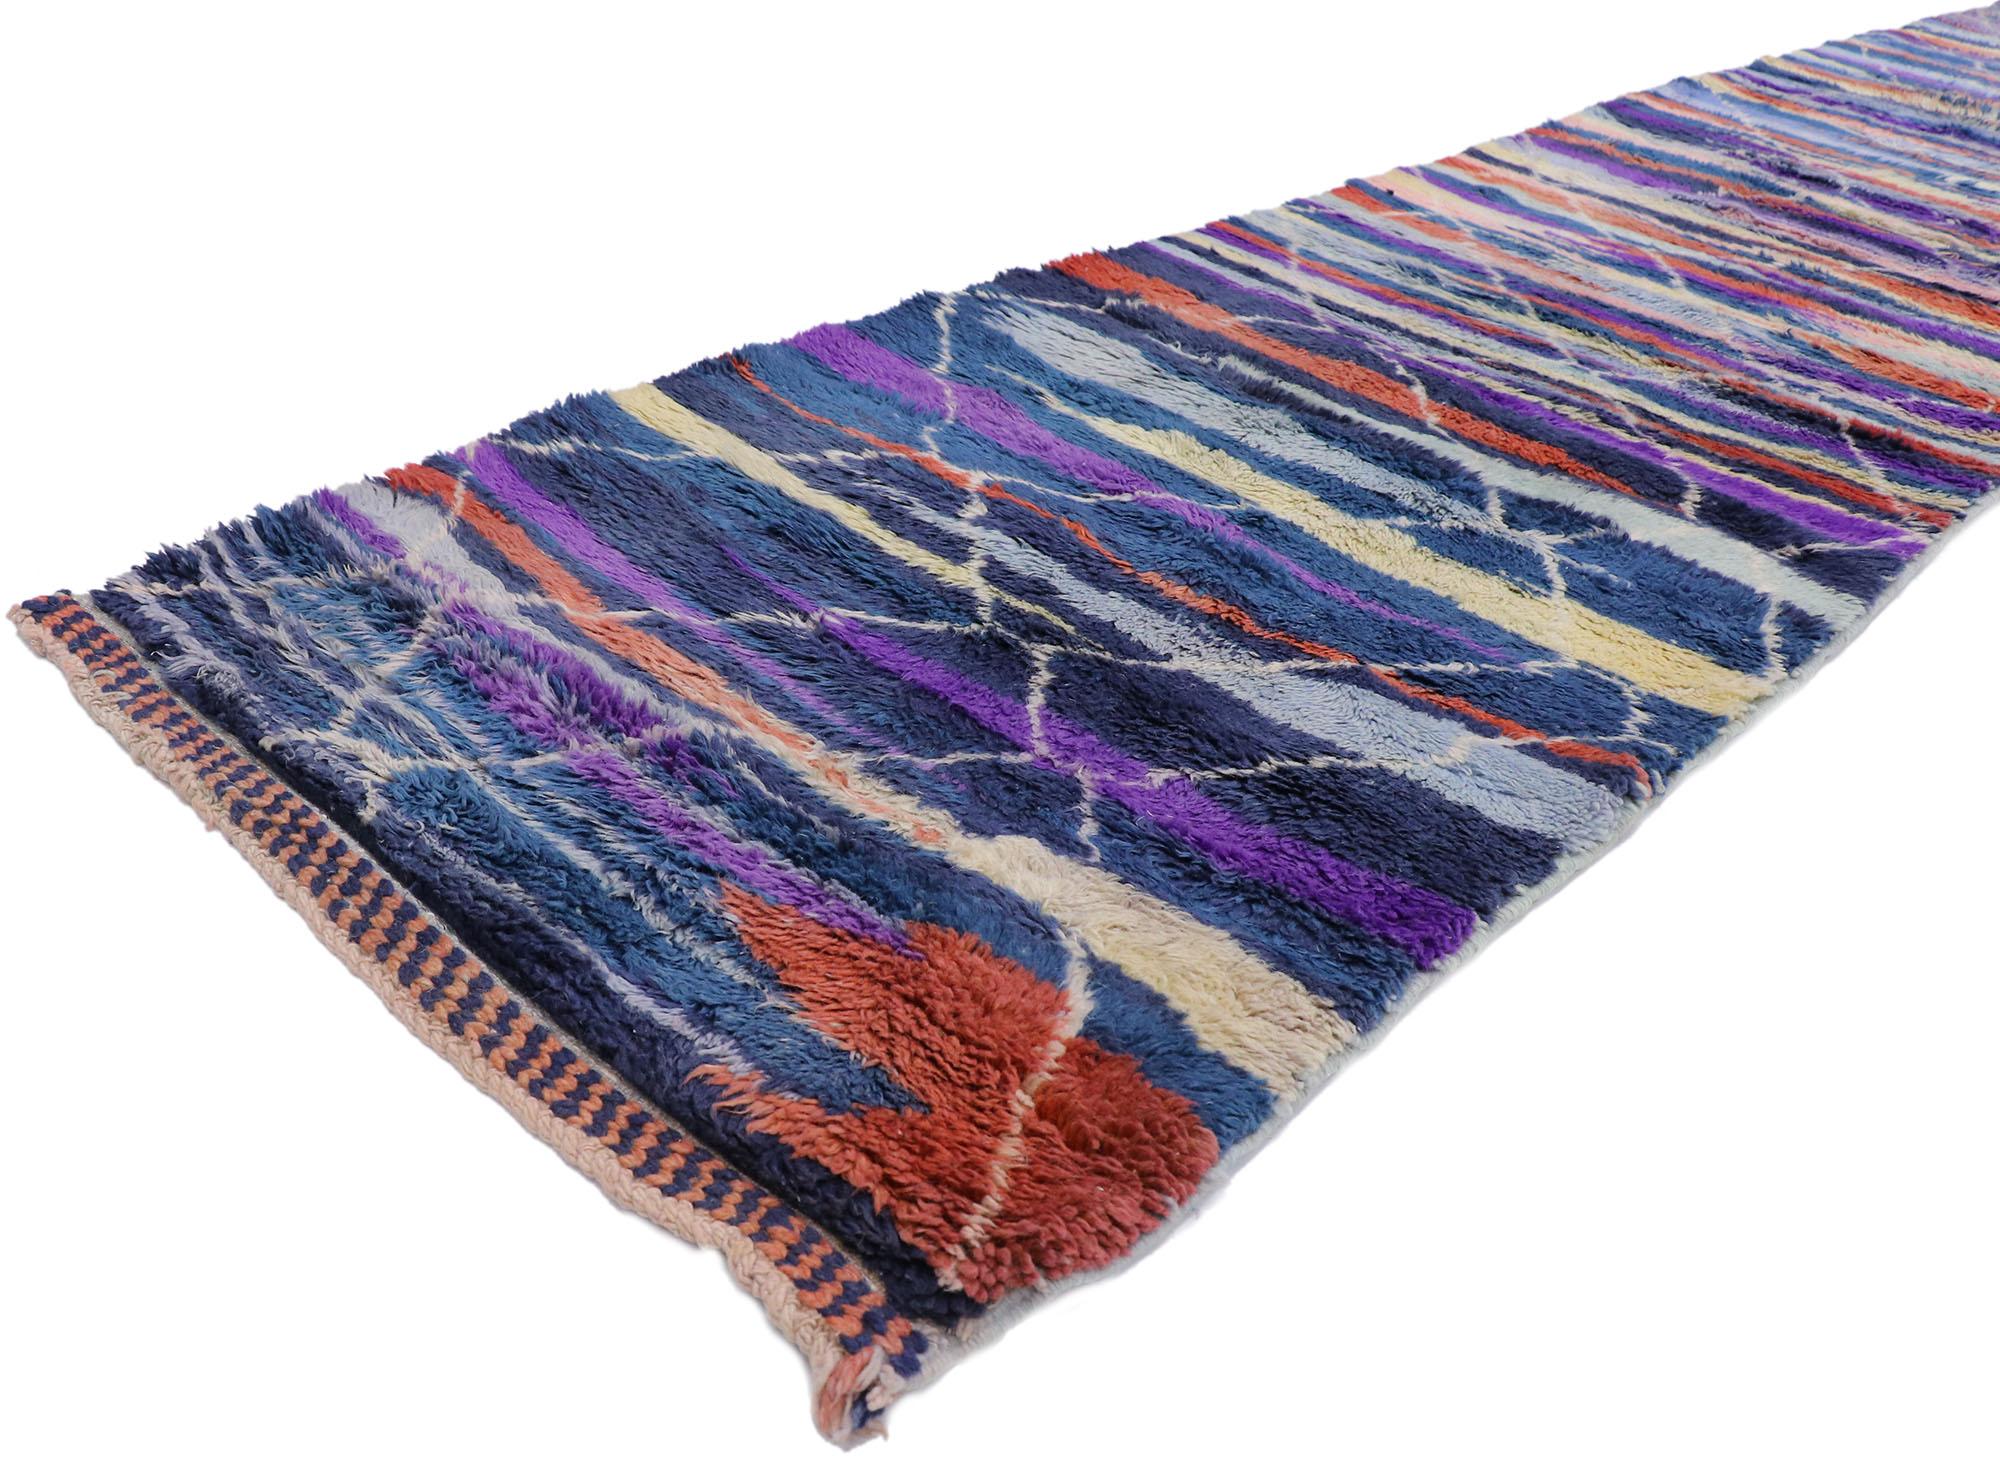 21093 New Contemporary Berber Moroccan runner Inspired by Sol LeWitt 02'06 x 13'09. Showcasing a bold expressive design, incredible detail and texture, this hand knotted wool contemporary Berber Moroccan runner is a captivating vision of woven